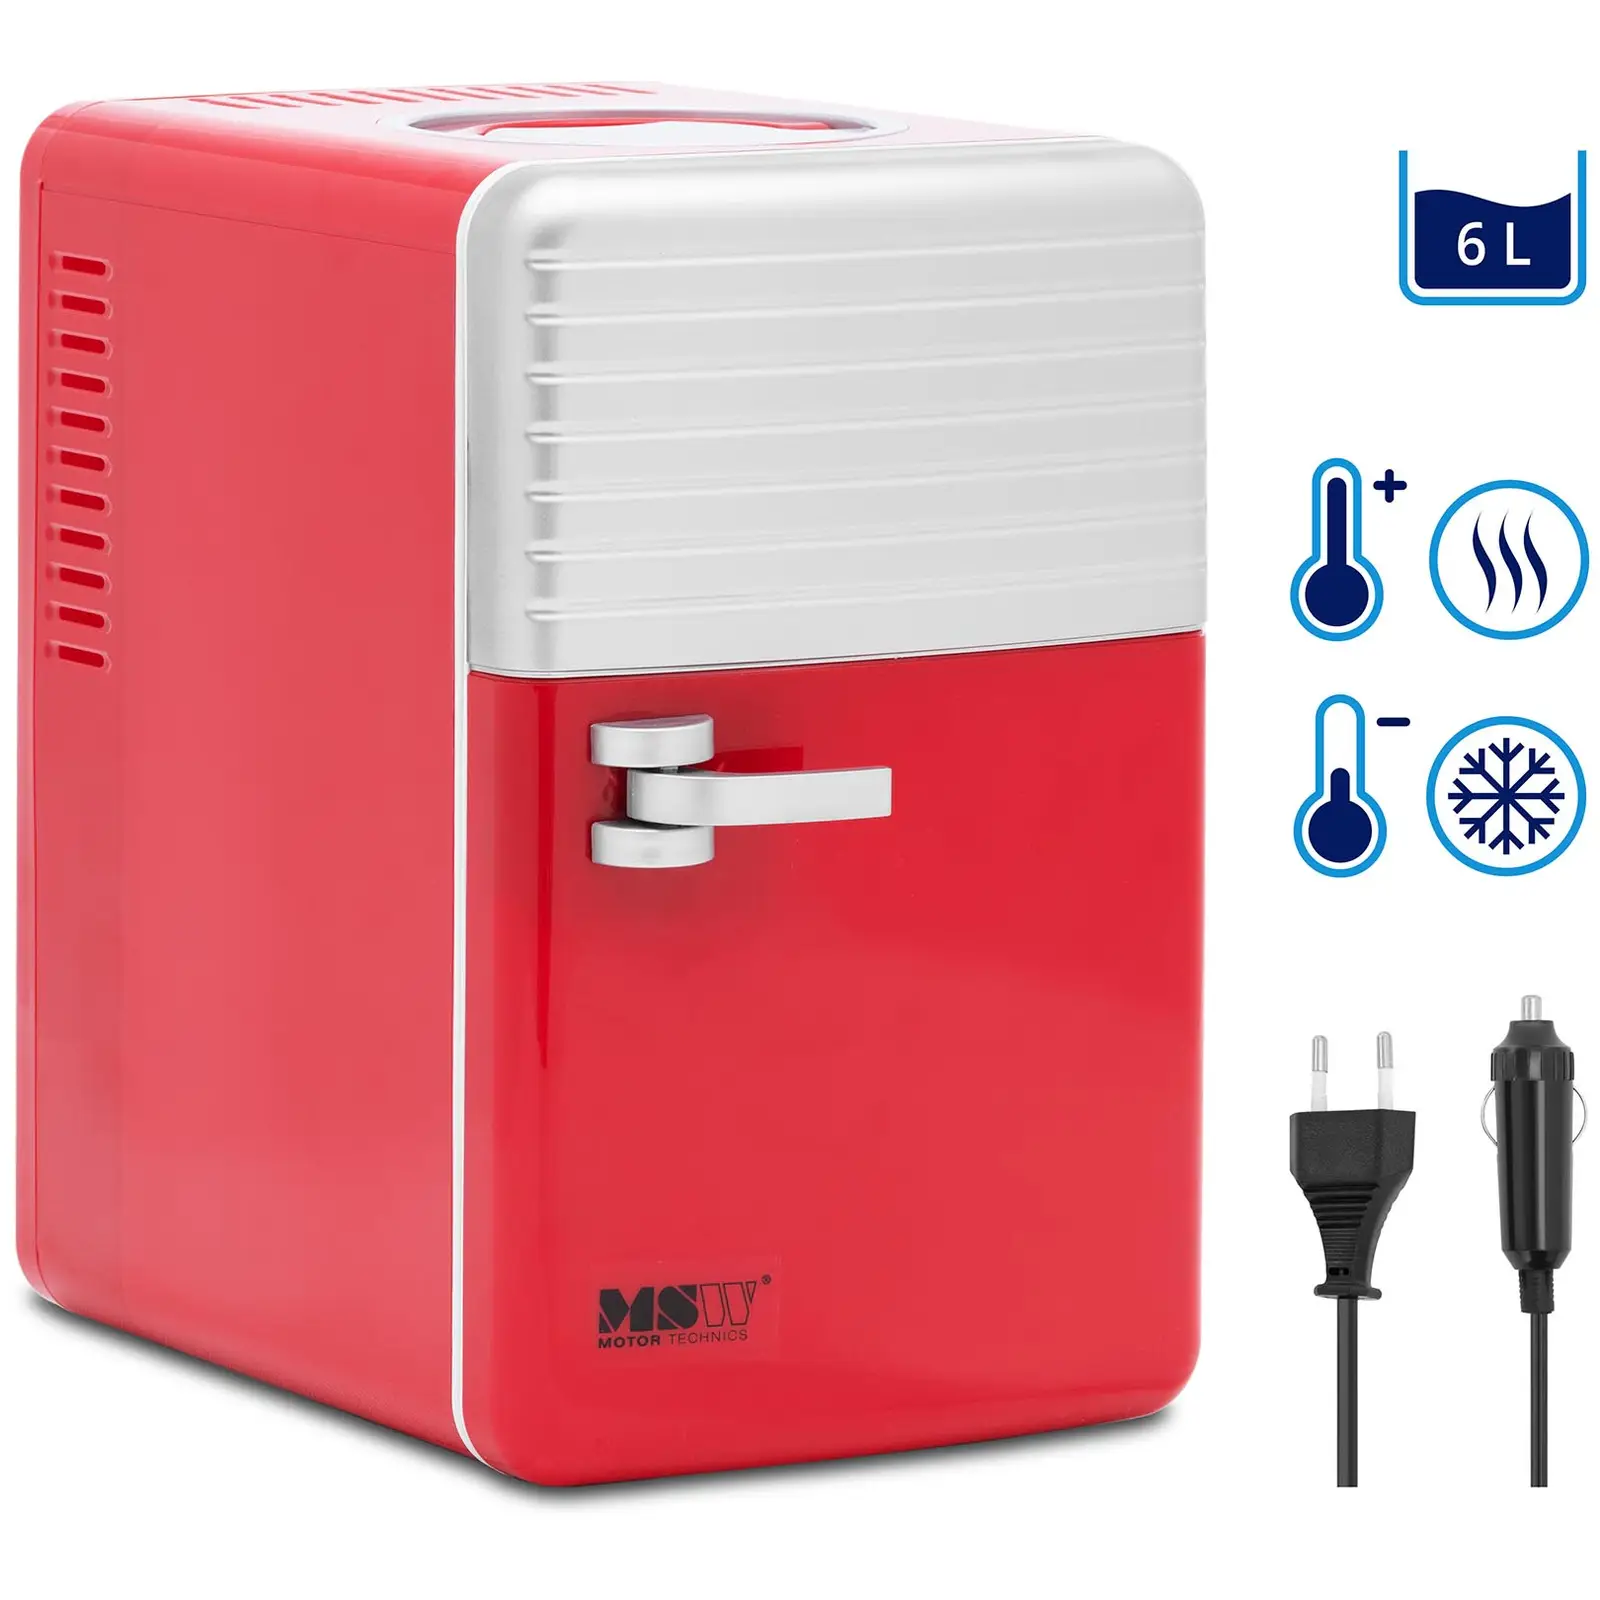 Mini Refrigerator 12 V / 230 V - 2-in-1 appliance with keep-warm function - 6 L - Red/silver